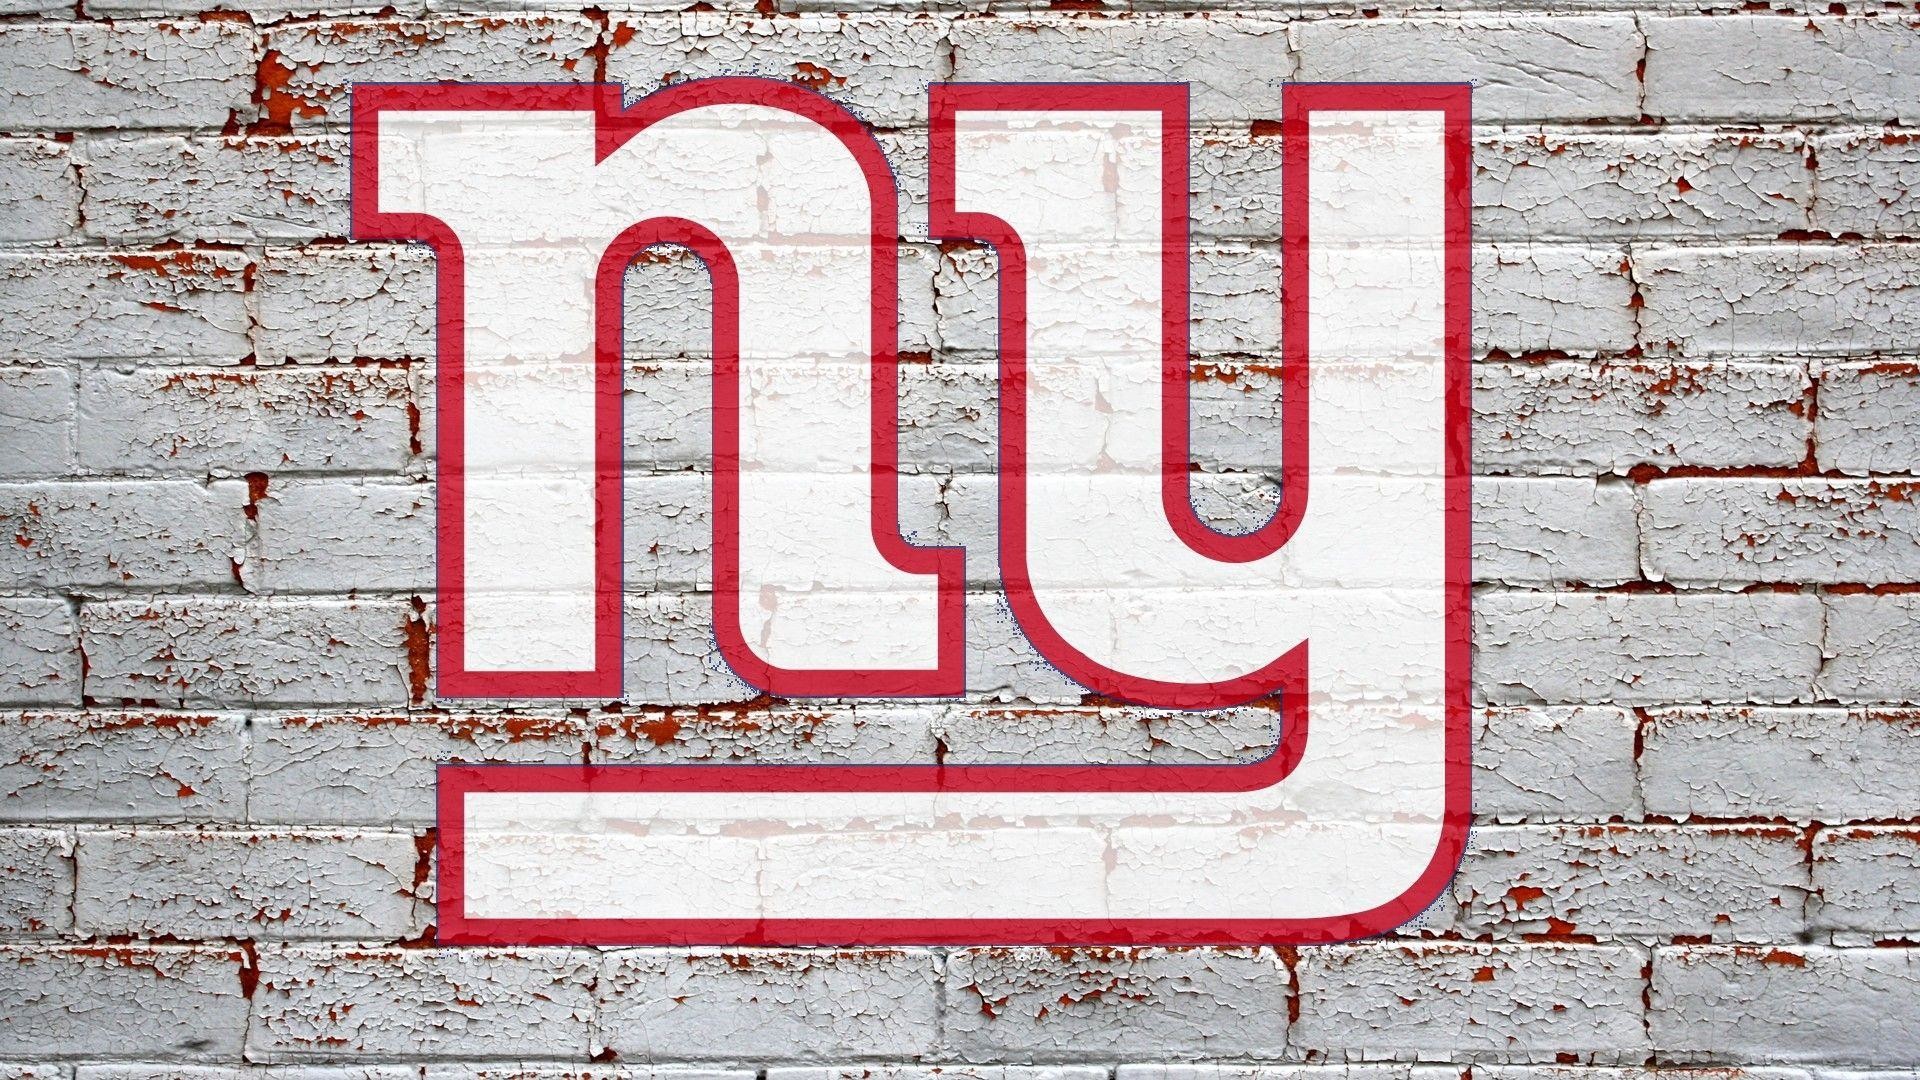 1920x1080 New York Giants Wallpaper HD | HD Wallpapers, Backgrounds, Images .